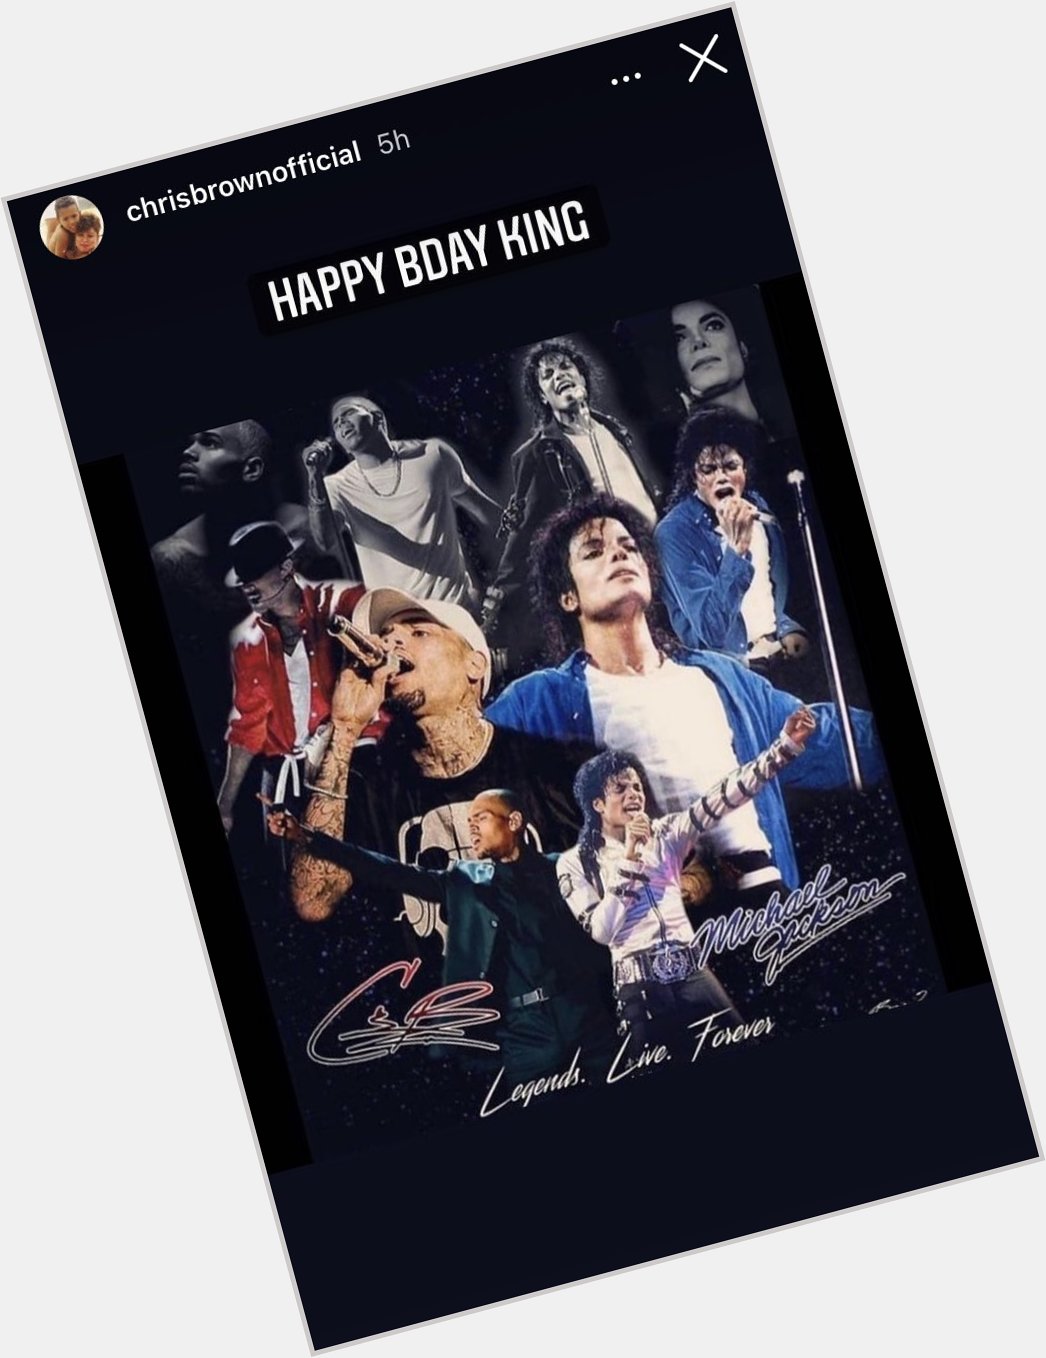 Chris Brown shares Happy Birthday post for the legend Michael Jackson 